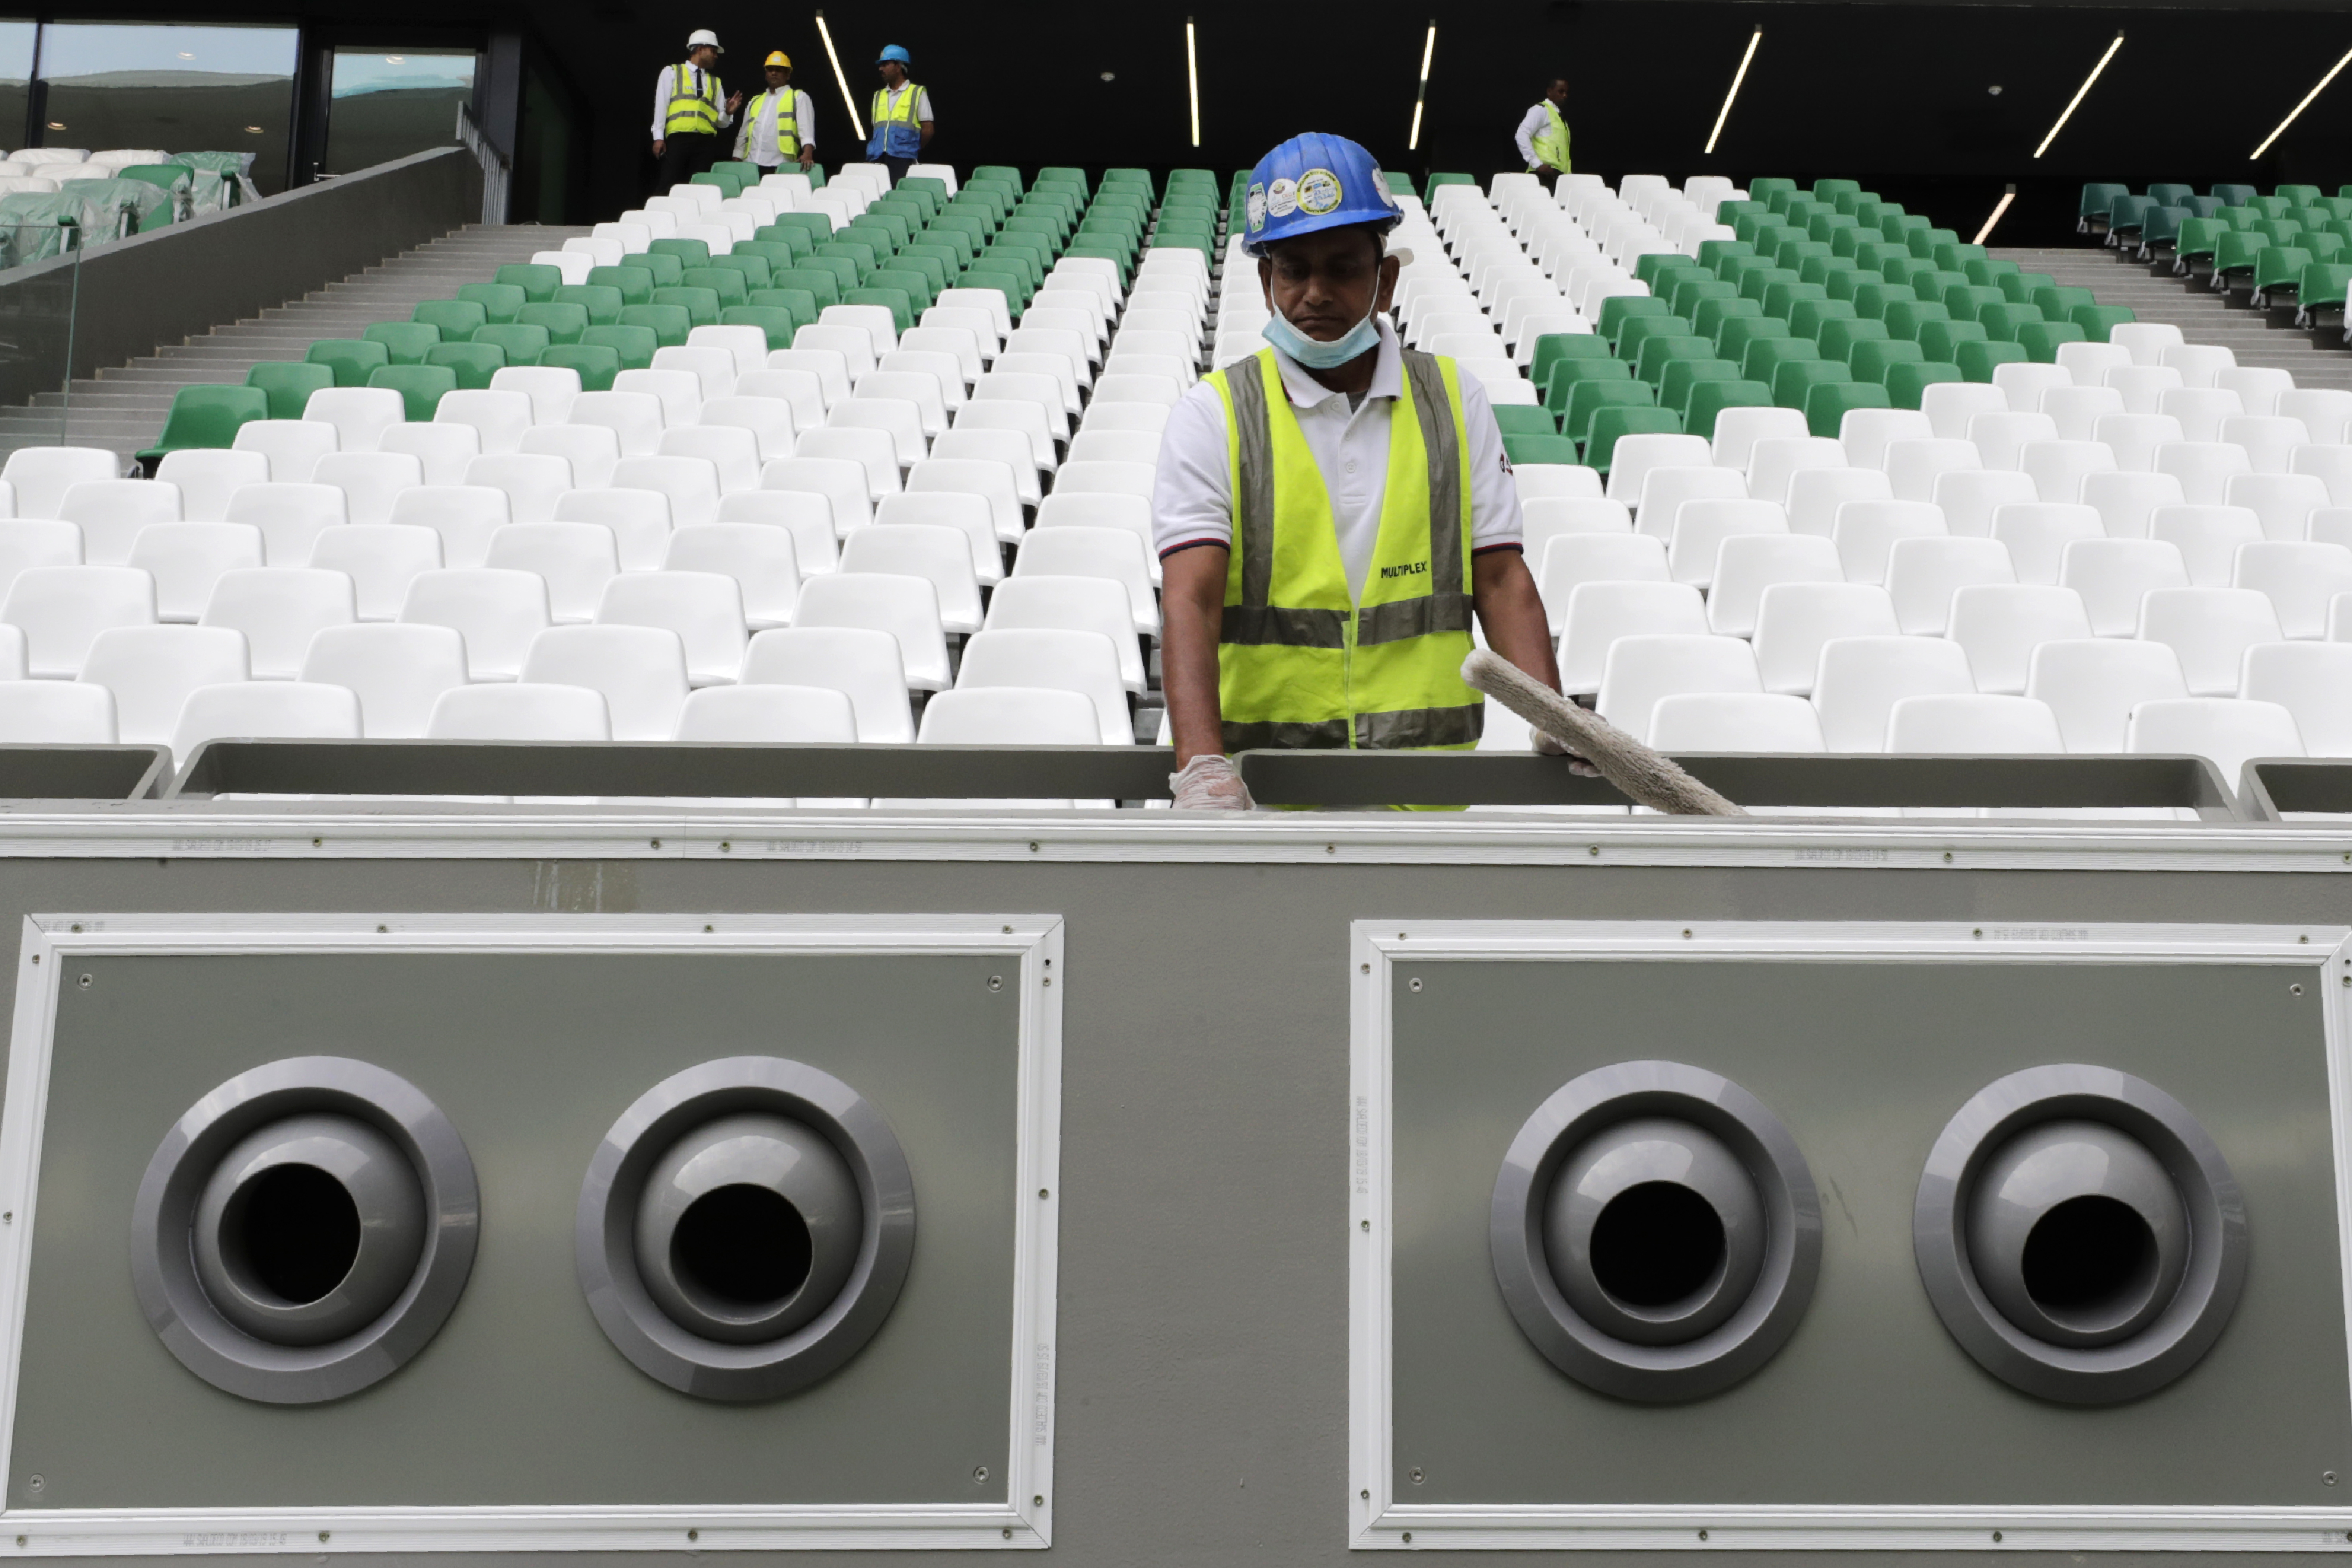 A worker cleans over a giant air conditioning at the Qatar Education Stadium, one of the 2022 World Cup stadiums, an open cooled stadium with a 45,350-seat capacity in Doha, Qatar, Sunday, Dec. 15, 2019. Qatar Education Stadium it isan open cooled stadium with a 45,350-seat capacity and is located in the middle of several university campuses at the Qatar Foundation's Education City in Doha. (AP Photo/Hassan Ammar)